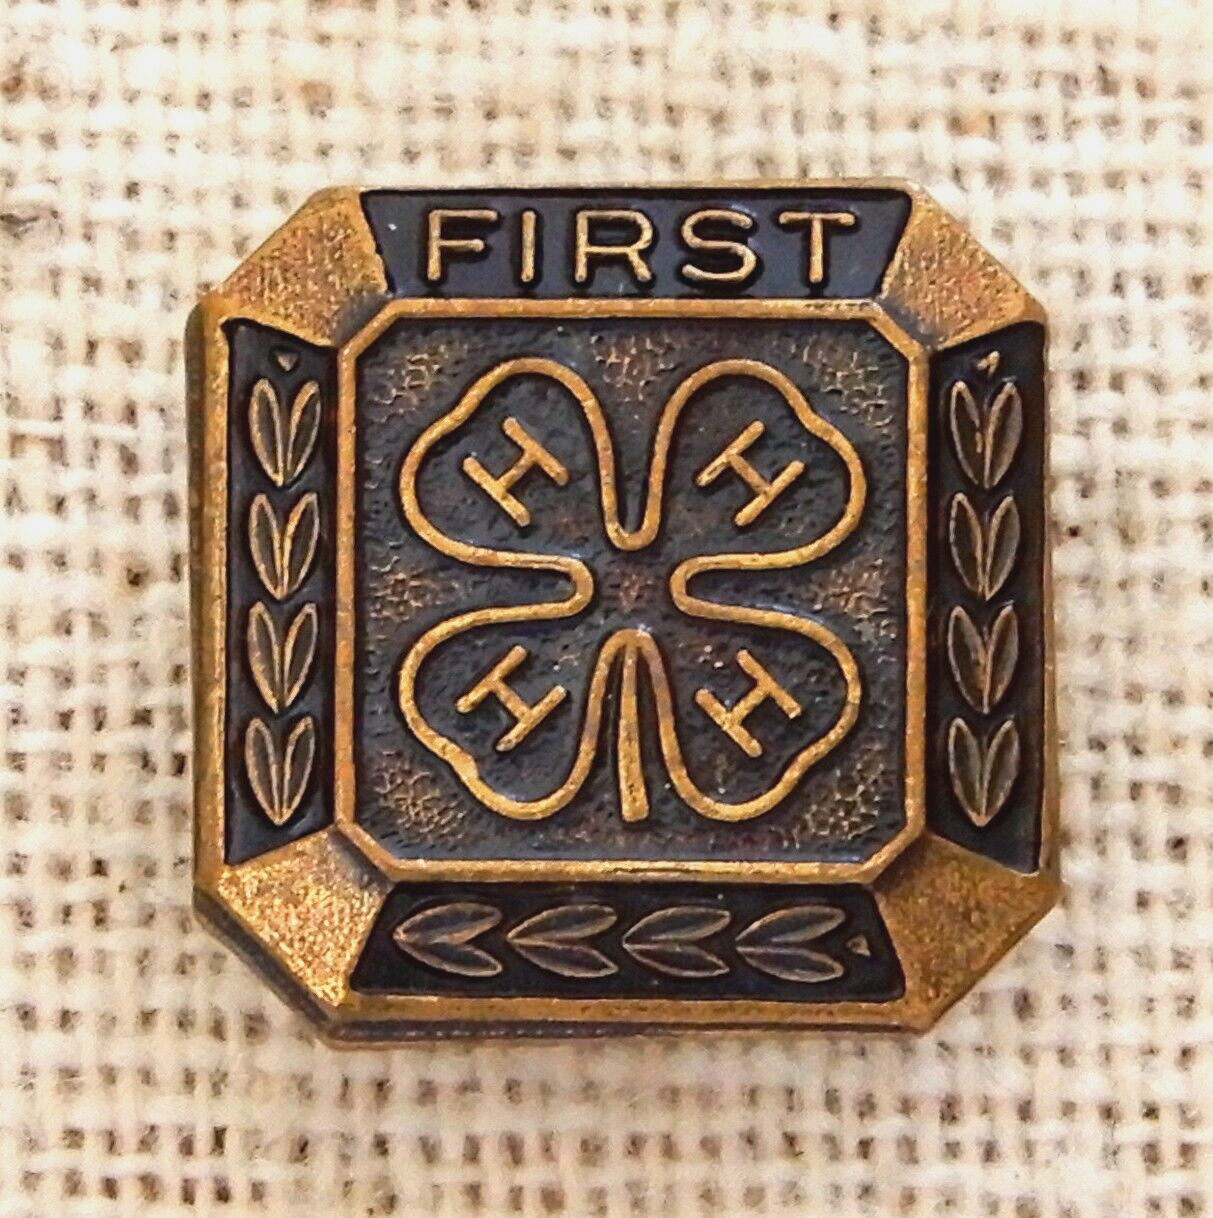 4 H Club First Year Pin Lapel Vintage 4 Leaf Clover Member Copper Bronze Tone